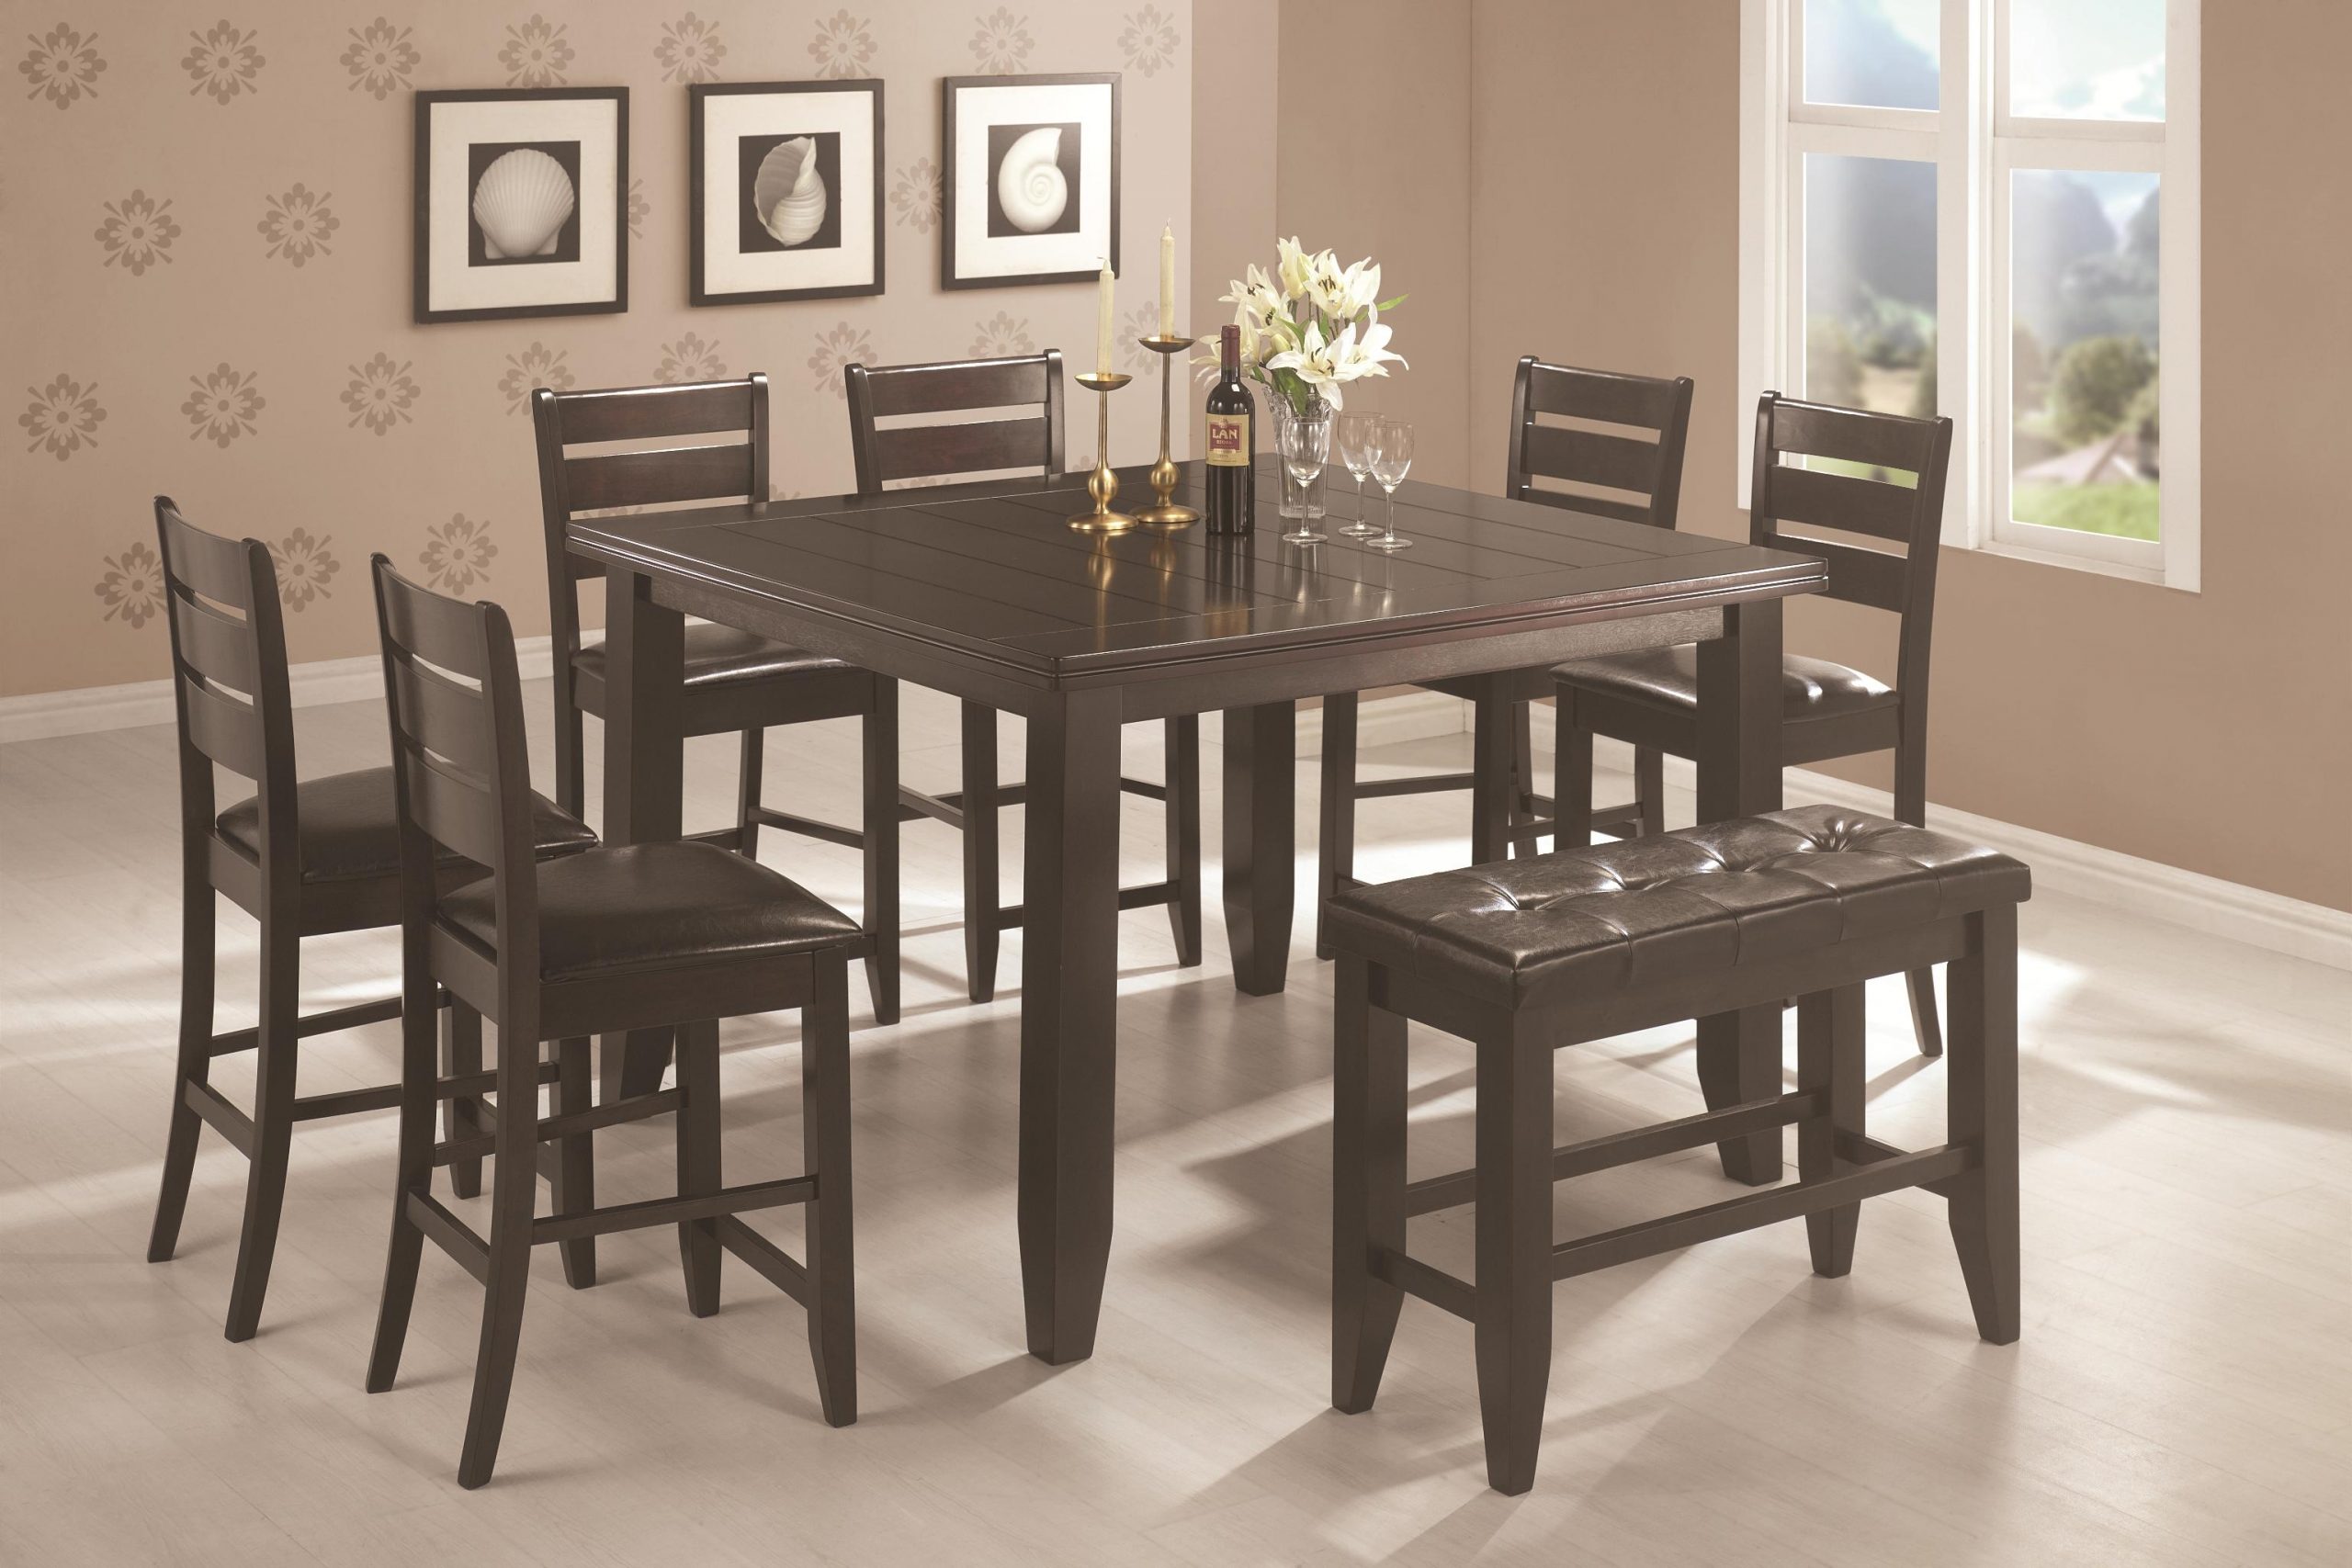 Coaster Dining Room Sets Euskal pertaining to size 3072 X 2048